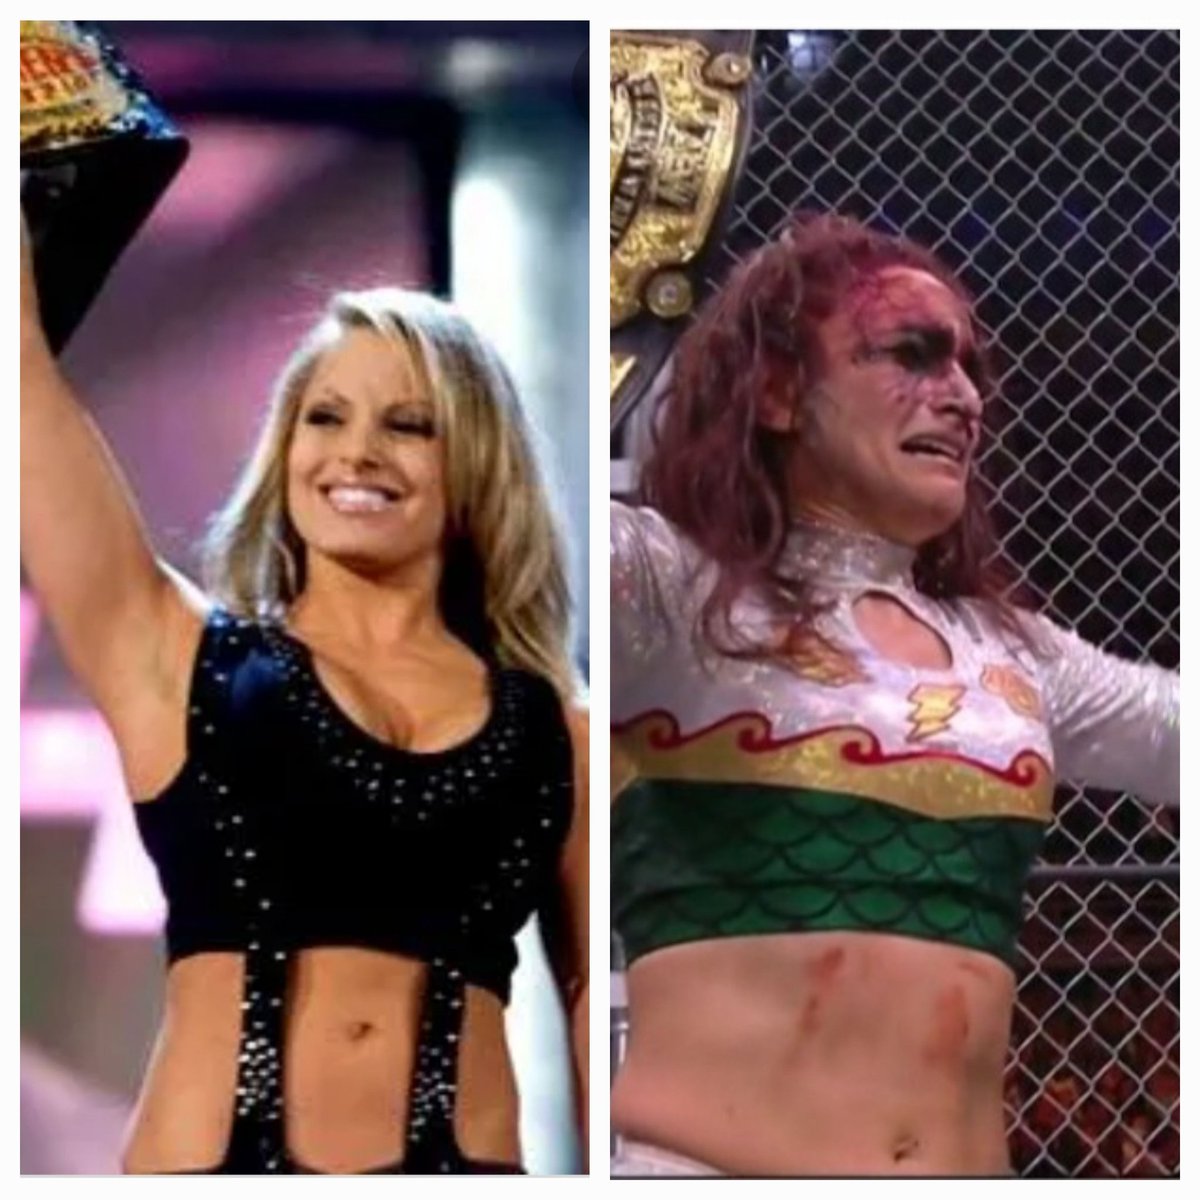 New feud alert: thunder Rosa just dethrone brit baker  in brutal cage  match. But then trish stratus  has appeared  on ramp.  And wants the frist shot at the champ at aew double or nothing. #trishstratus #thunderrosa https://t.co/uDr5pEZCC1